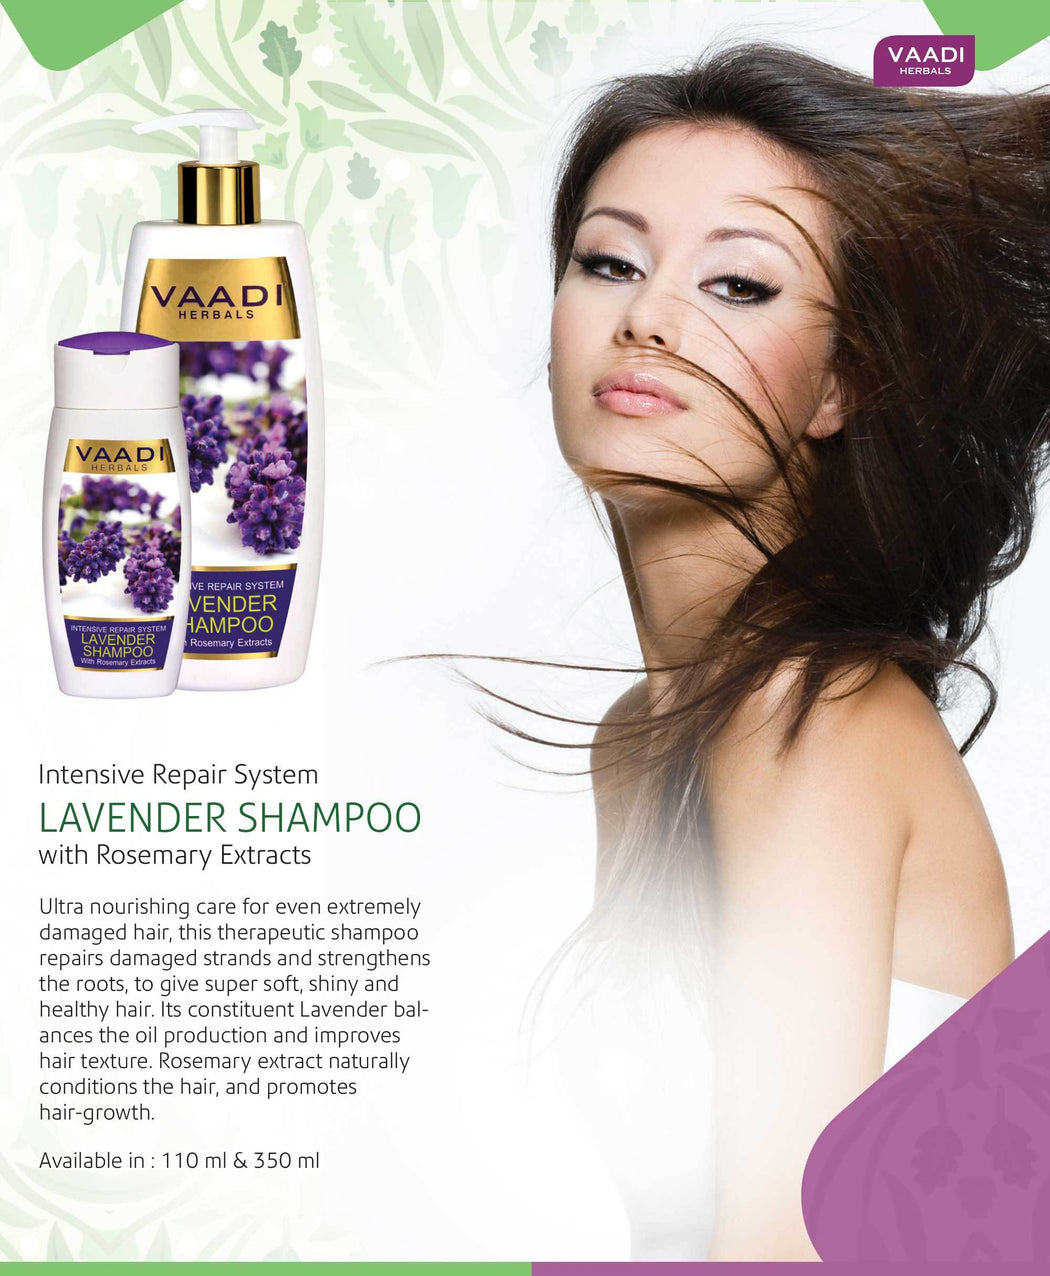 Intensive Repair Organic Lavender Shampoo with Rosemary Extract- Improves Hair Growth - Ultra Nourishing (110 ml/ 4 fl oz)